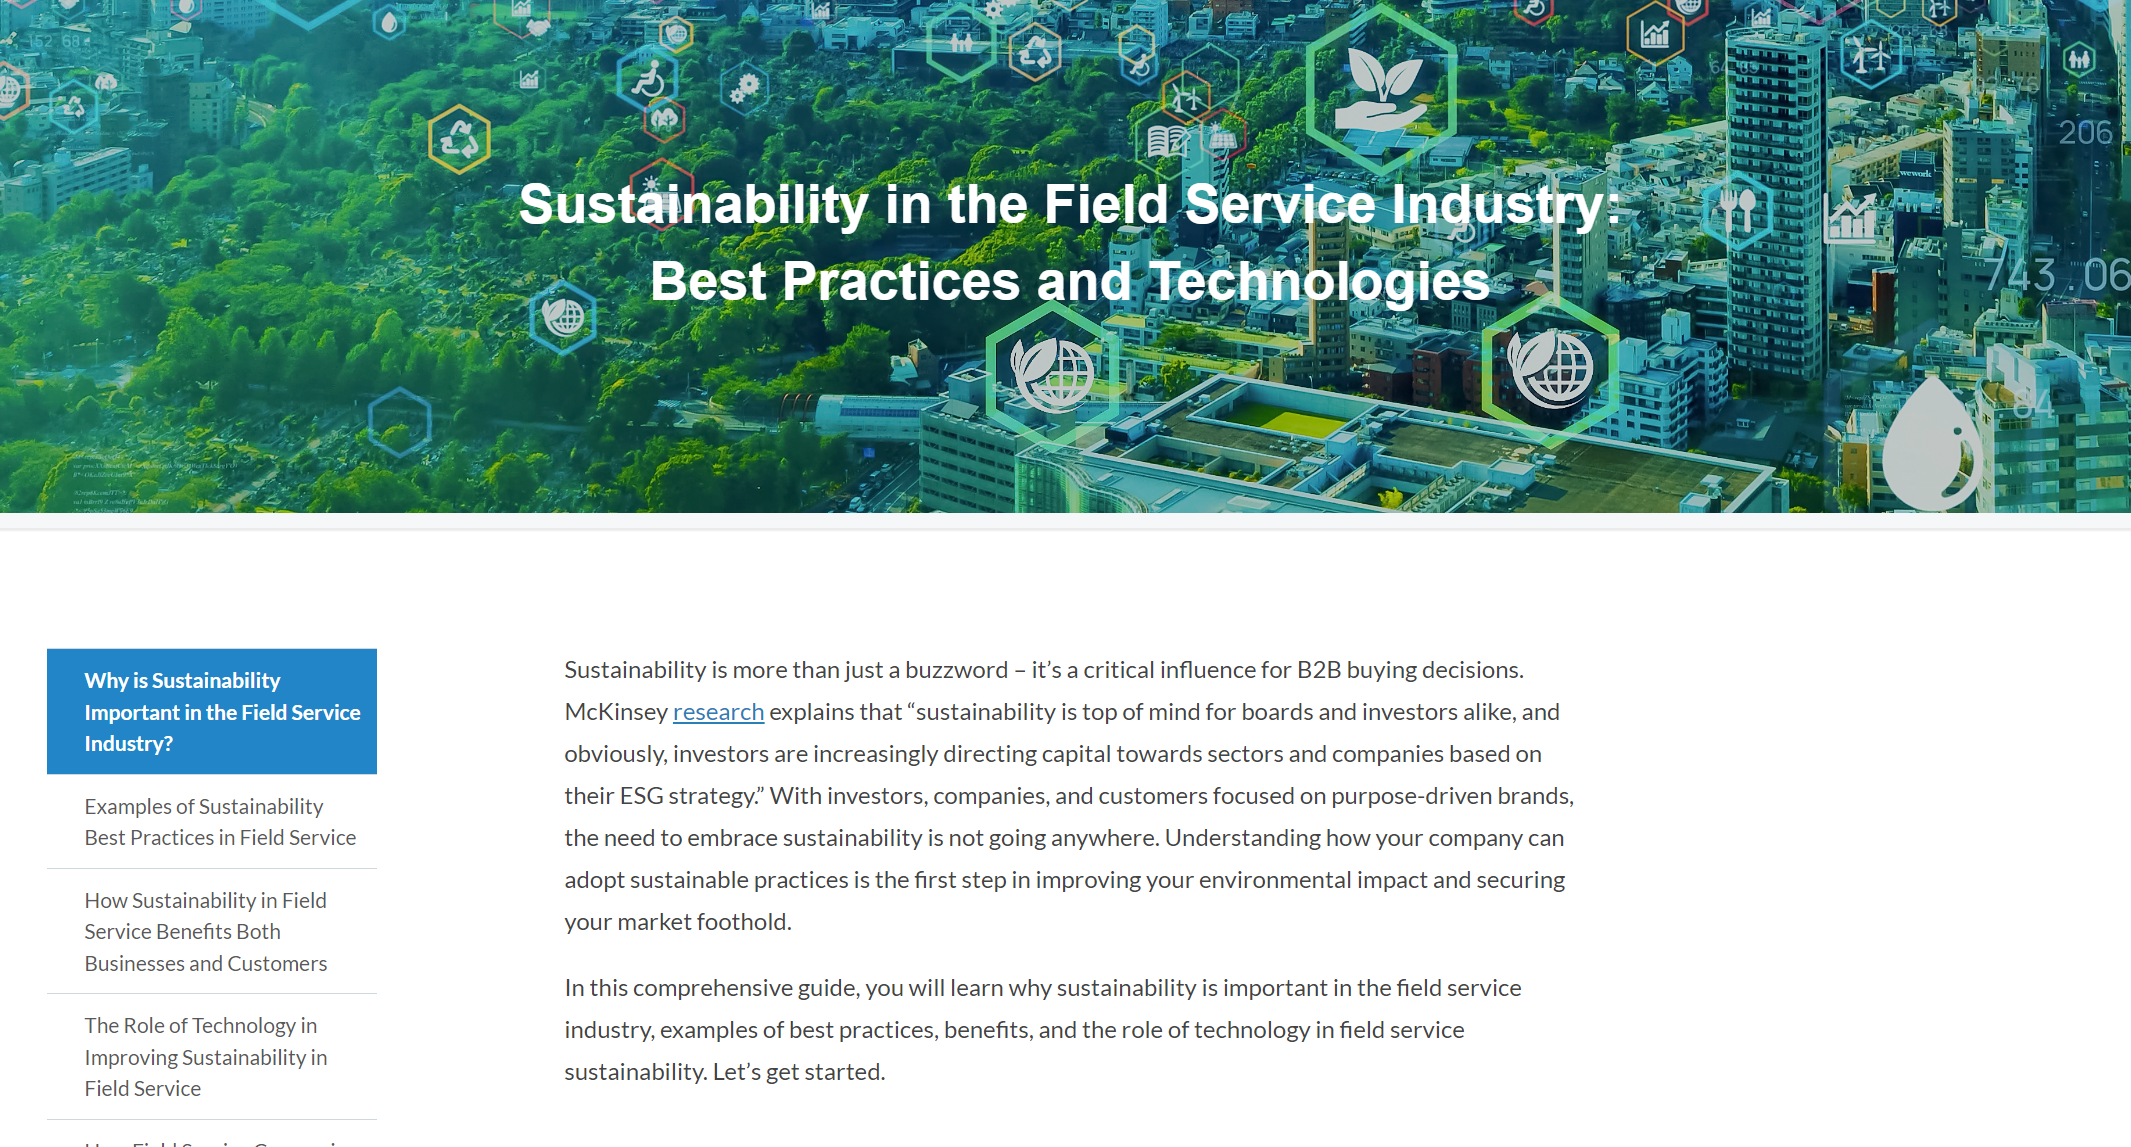 Sustainability in the Field Service Industry: Best Practices and Technologies